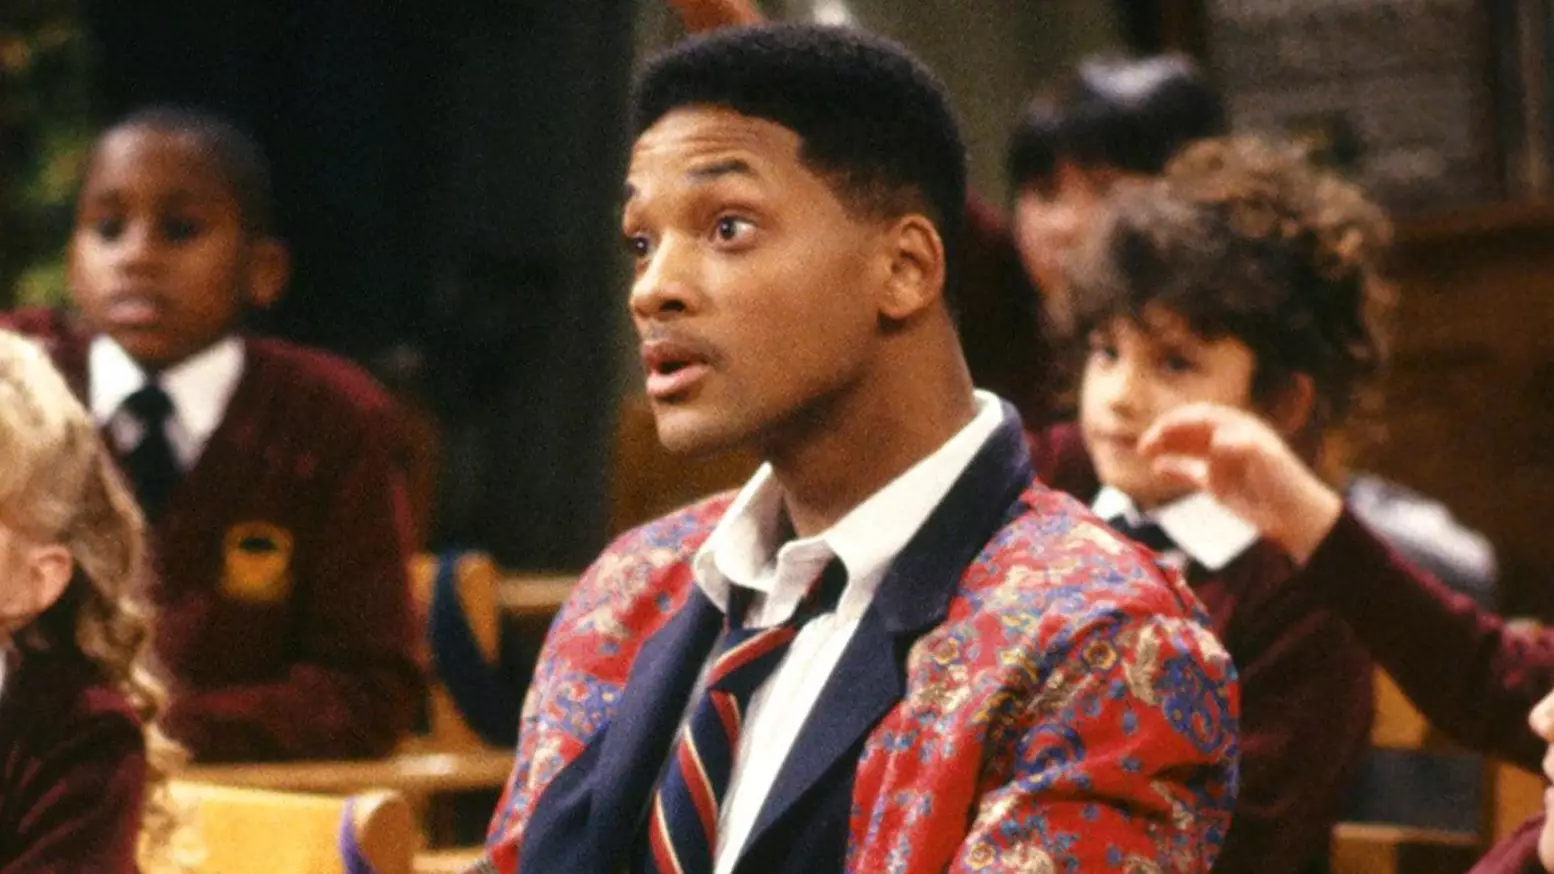 Will Smith And The Fresh Prince Of Bel Air Cast Will Reunite For TV Special